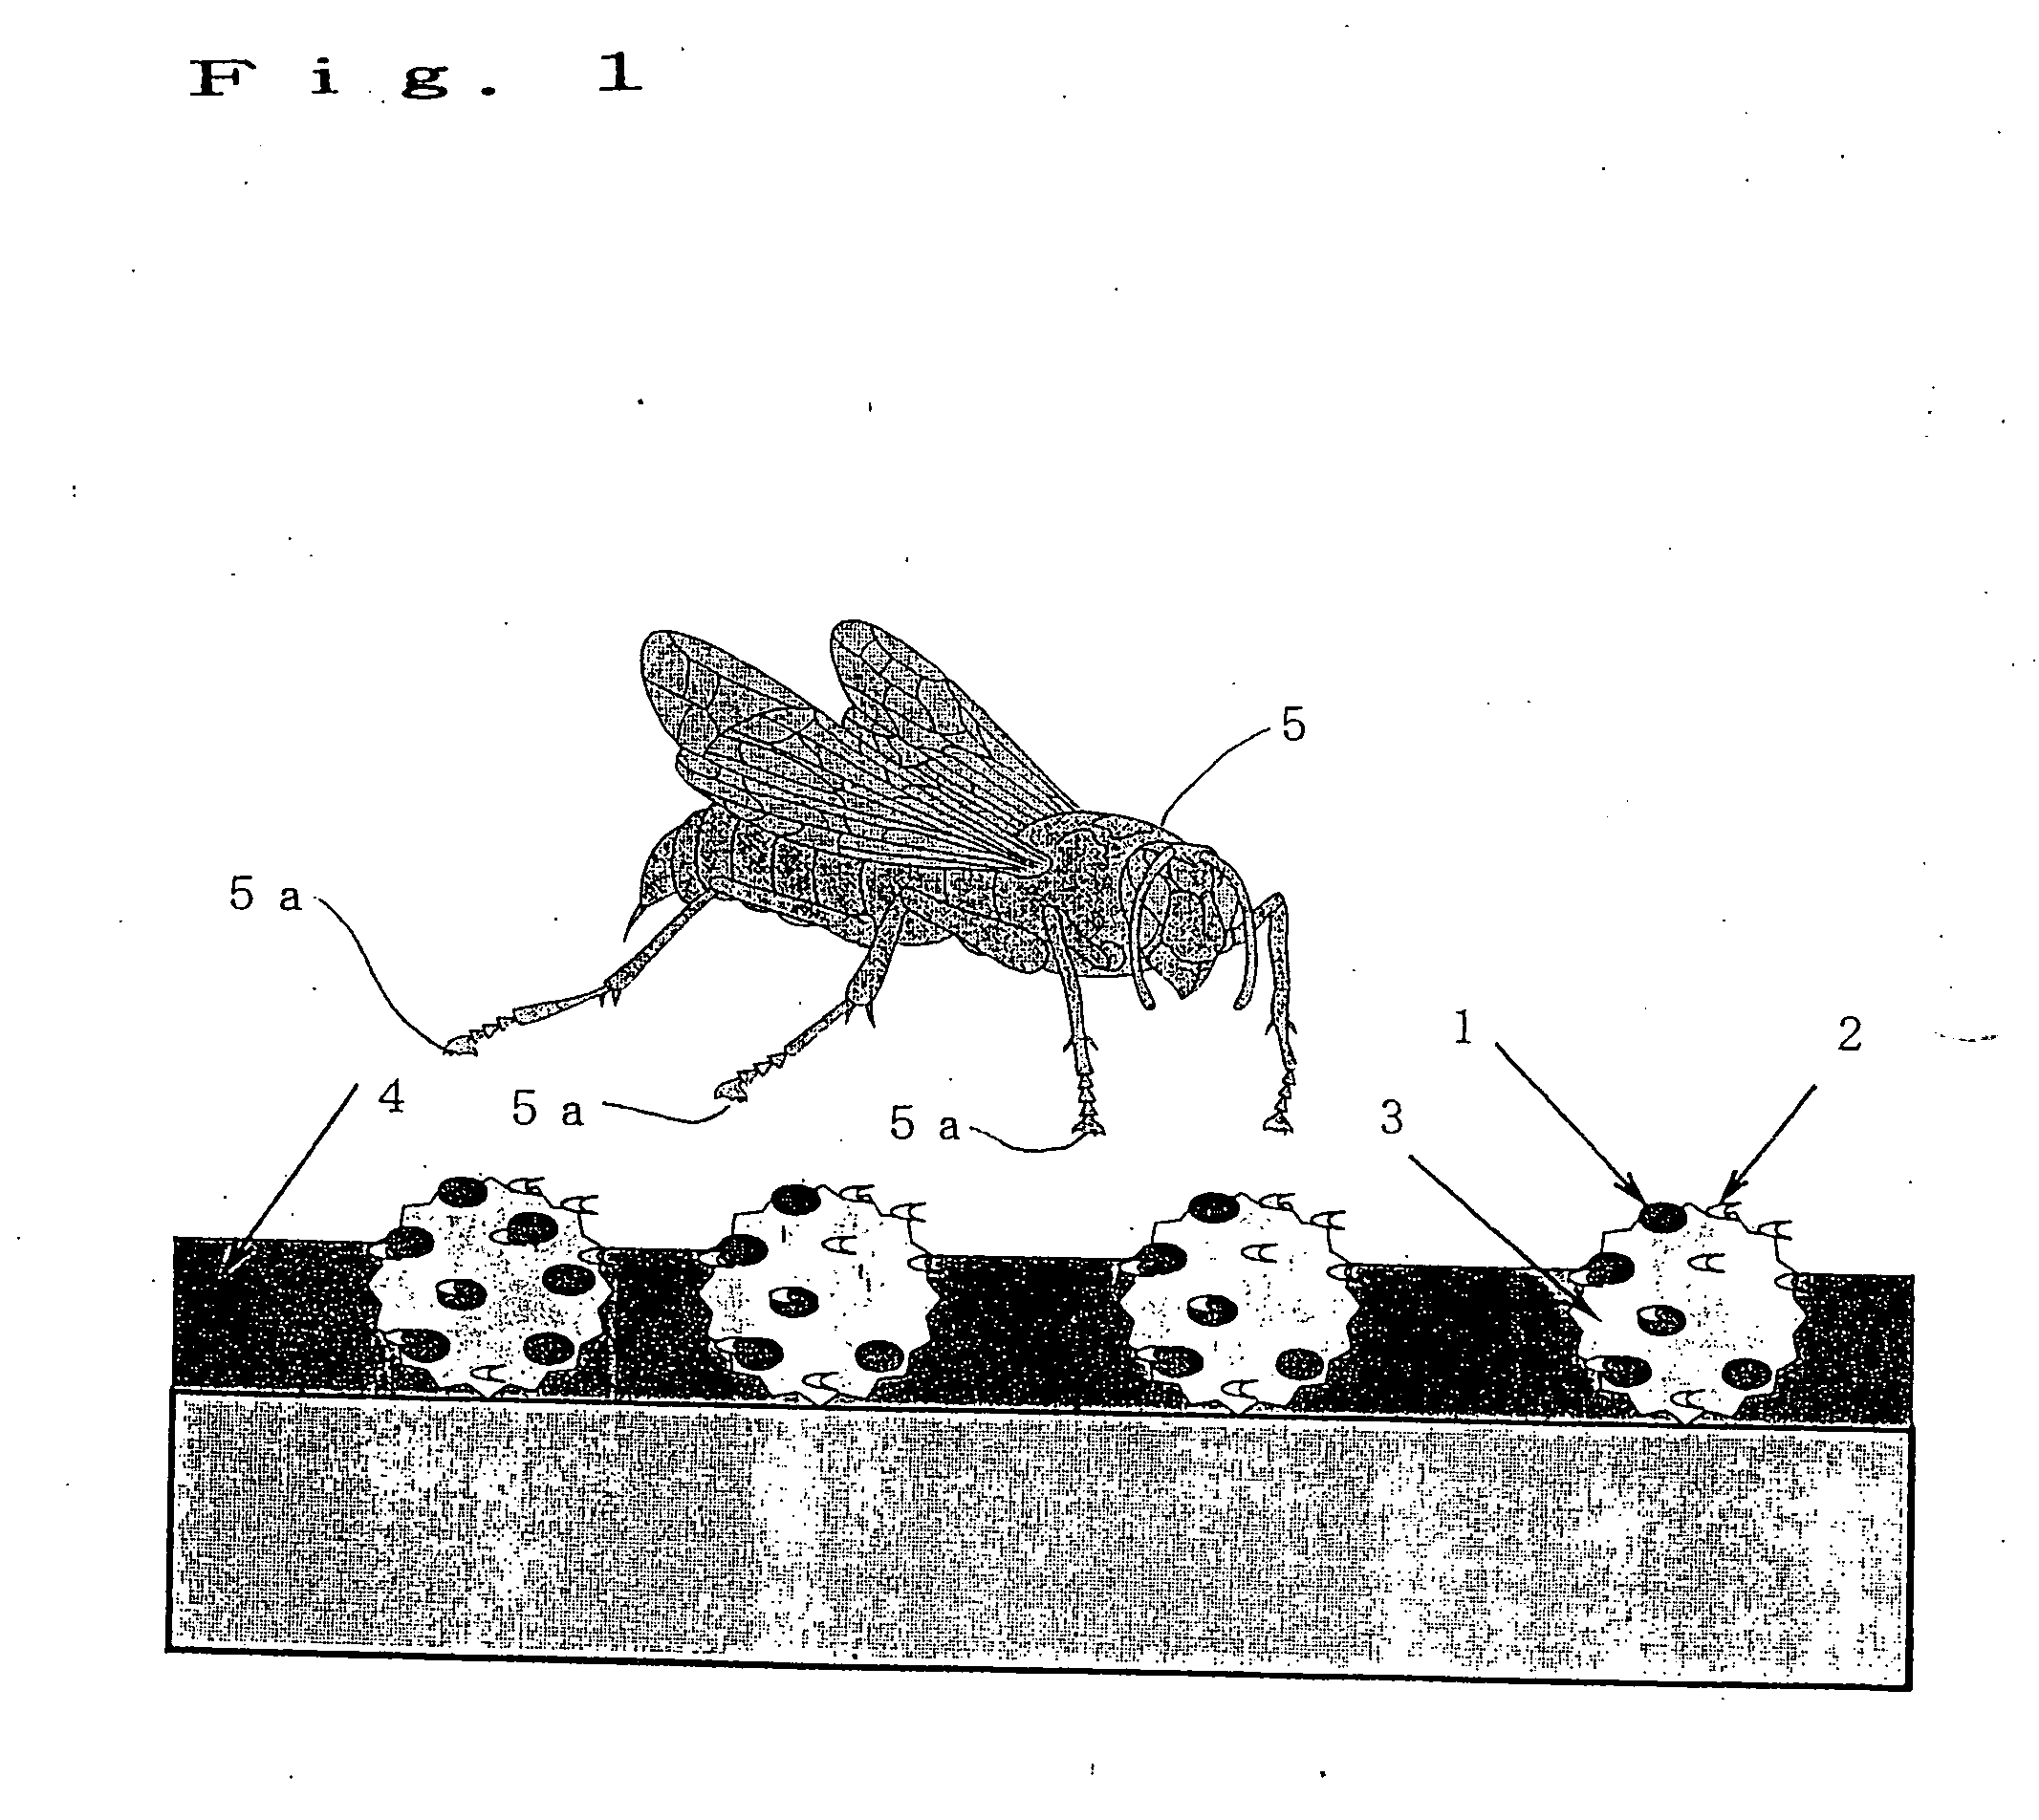 Insect pest-repellent film, insect pest-repellent paint and method for producing the same